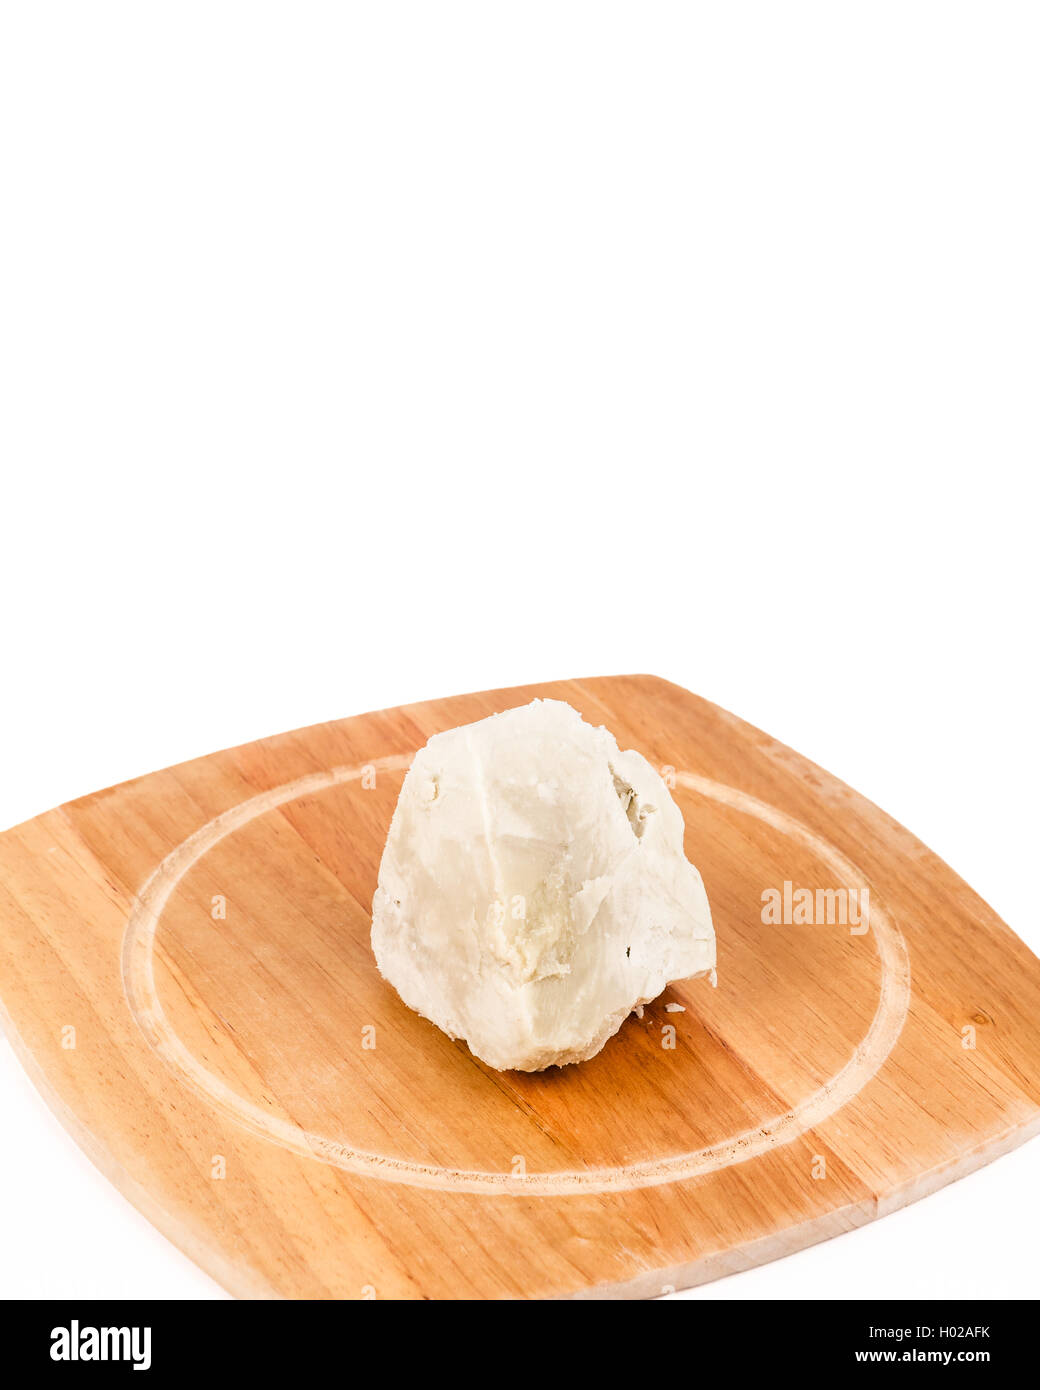 Unrefined, organic Shea butter laying on the wooden board standing on the clean white background. Stock Photo